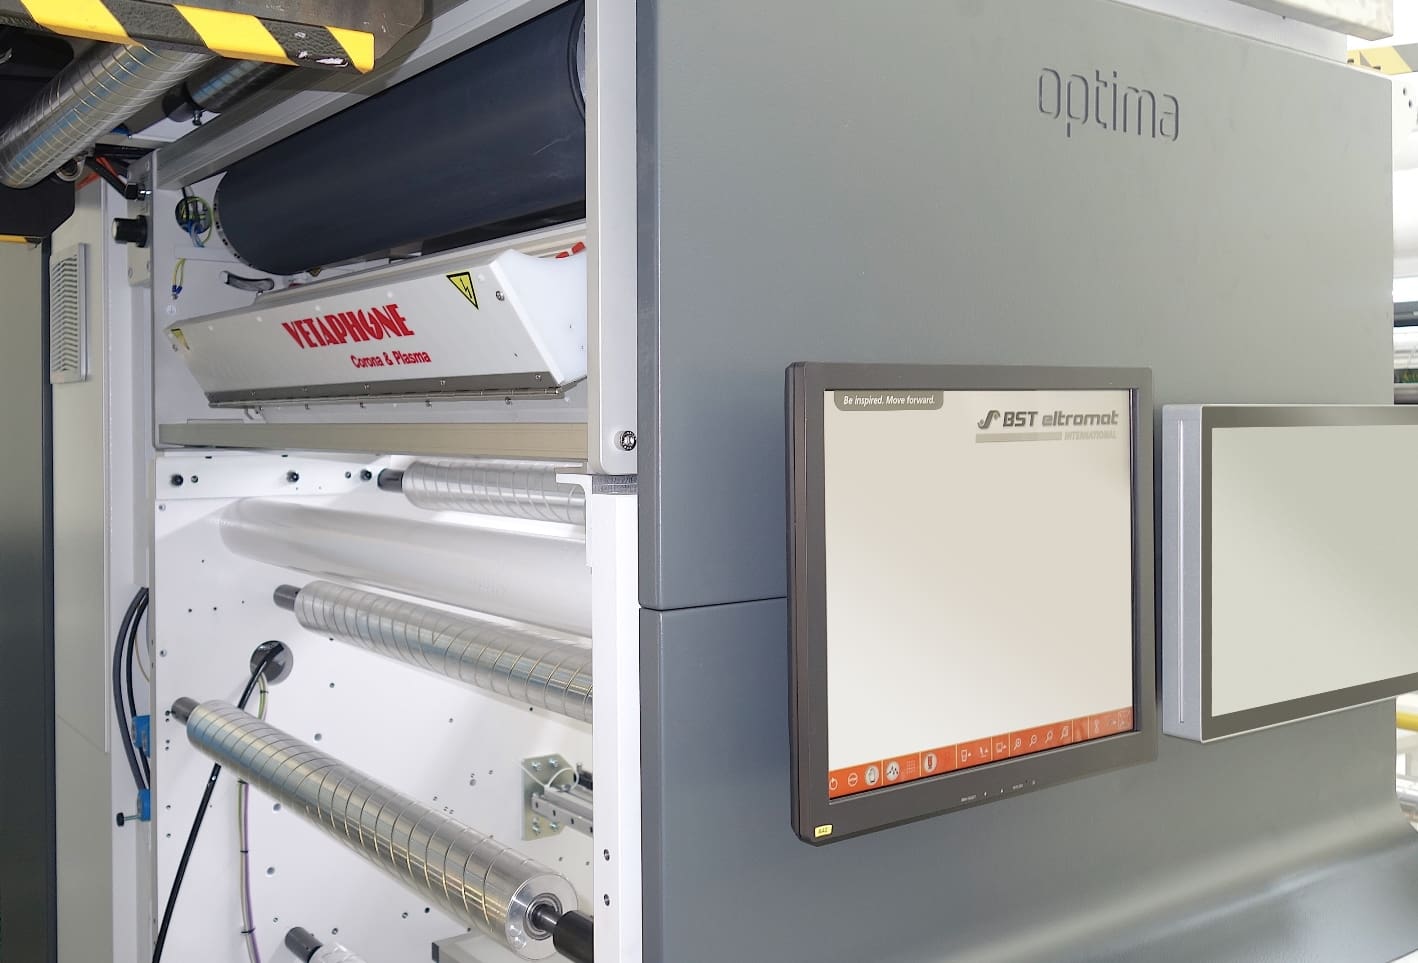 SOMA chose Vetaphone Corona technology because of the ease with which it can be integrated into its Optima range of CI-flexo presses